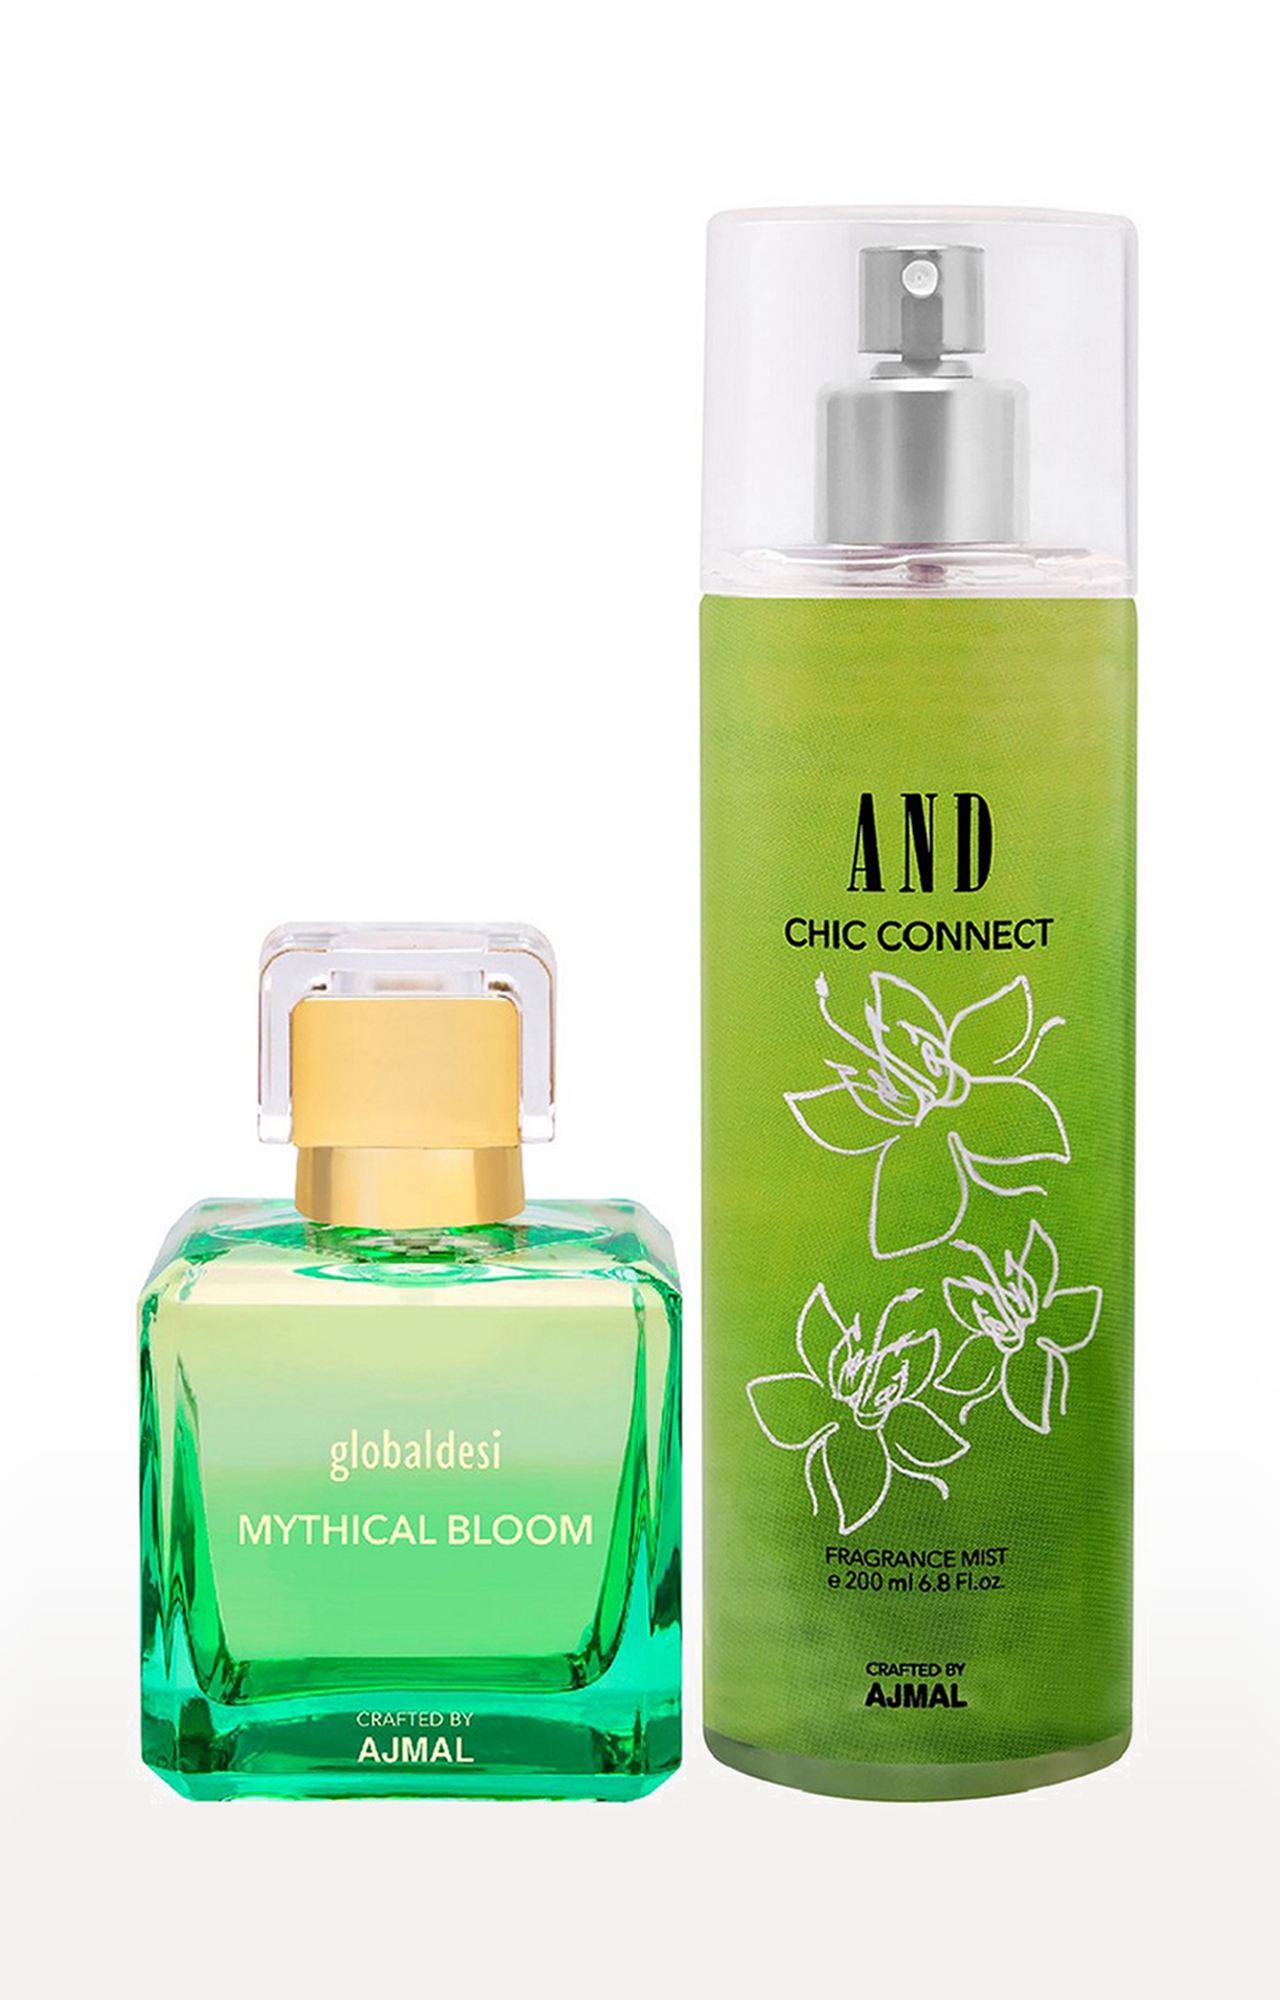 Global Mythical Bloom Trance EDP 100ML & AND Chi Connect Body Mist 200ML 